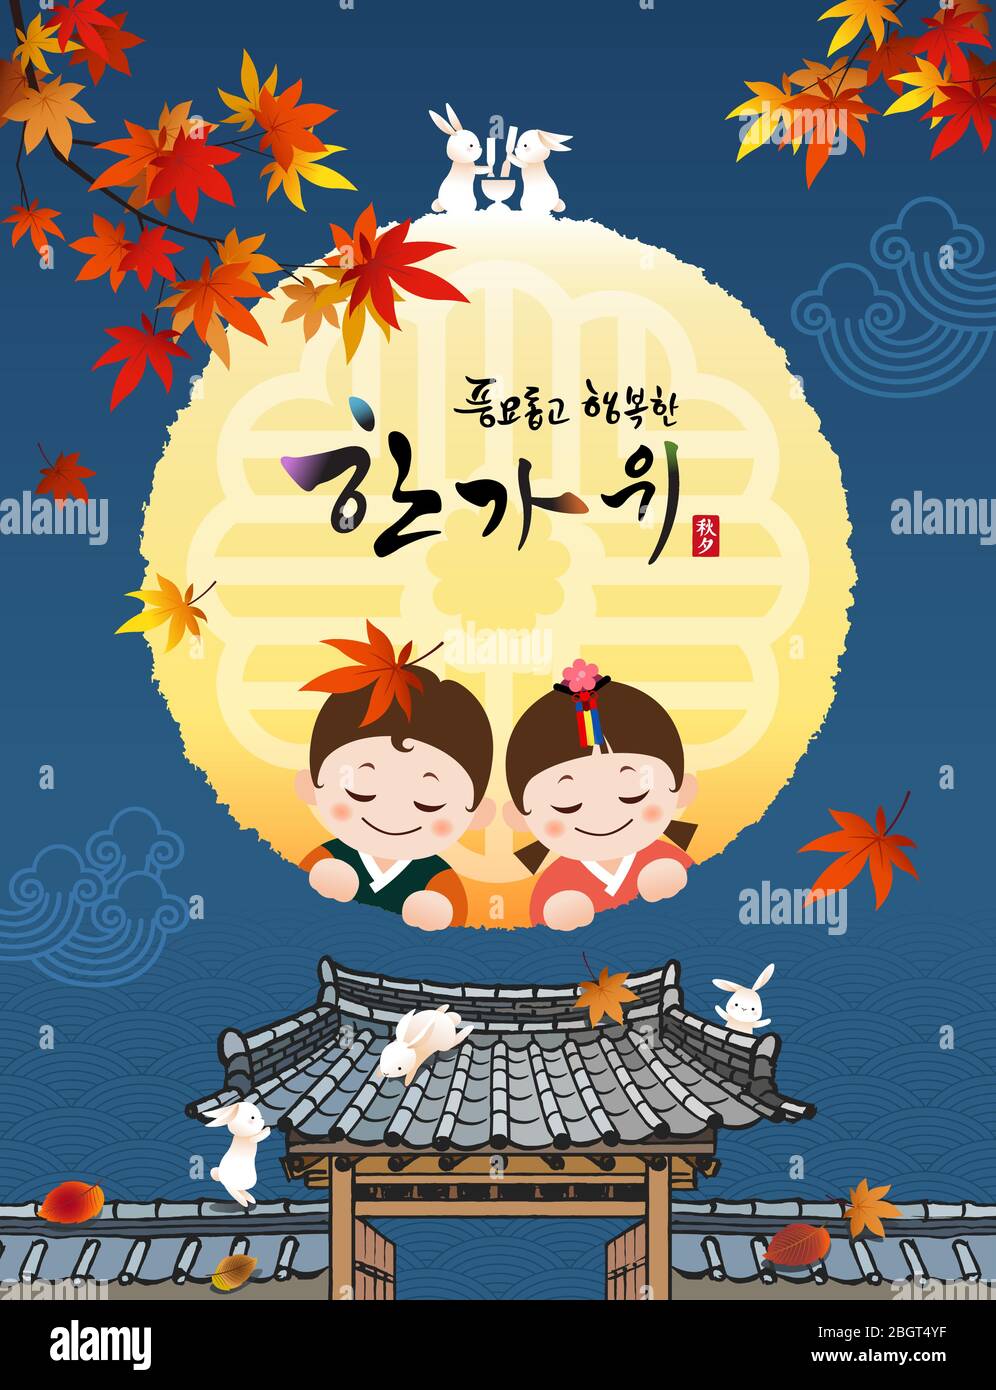 Rich harvest and happy Chuseok, Hangawi, Korean translation. Autumn scenery, full moon, rabbits, and traditional hanbok children greet you. Stock Vector